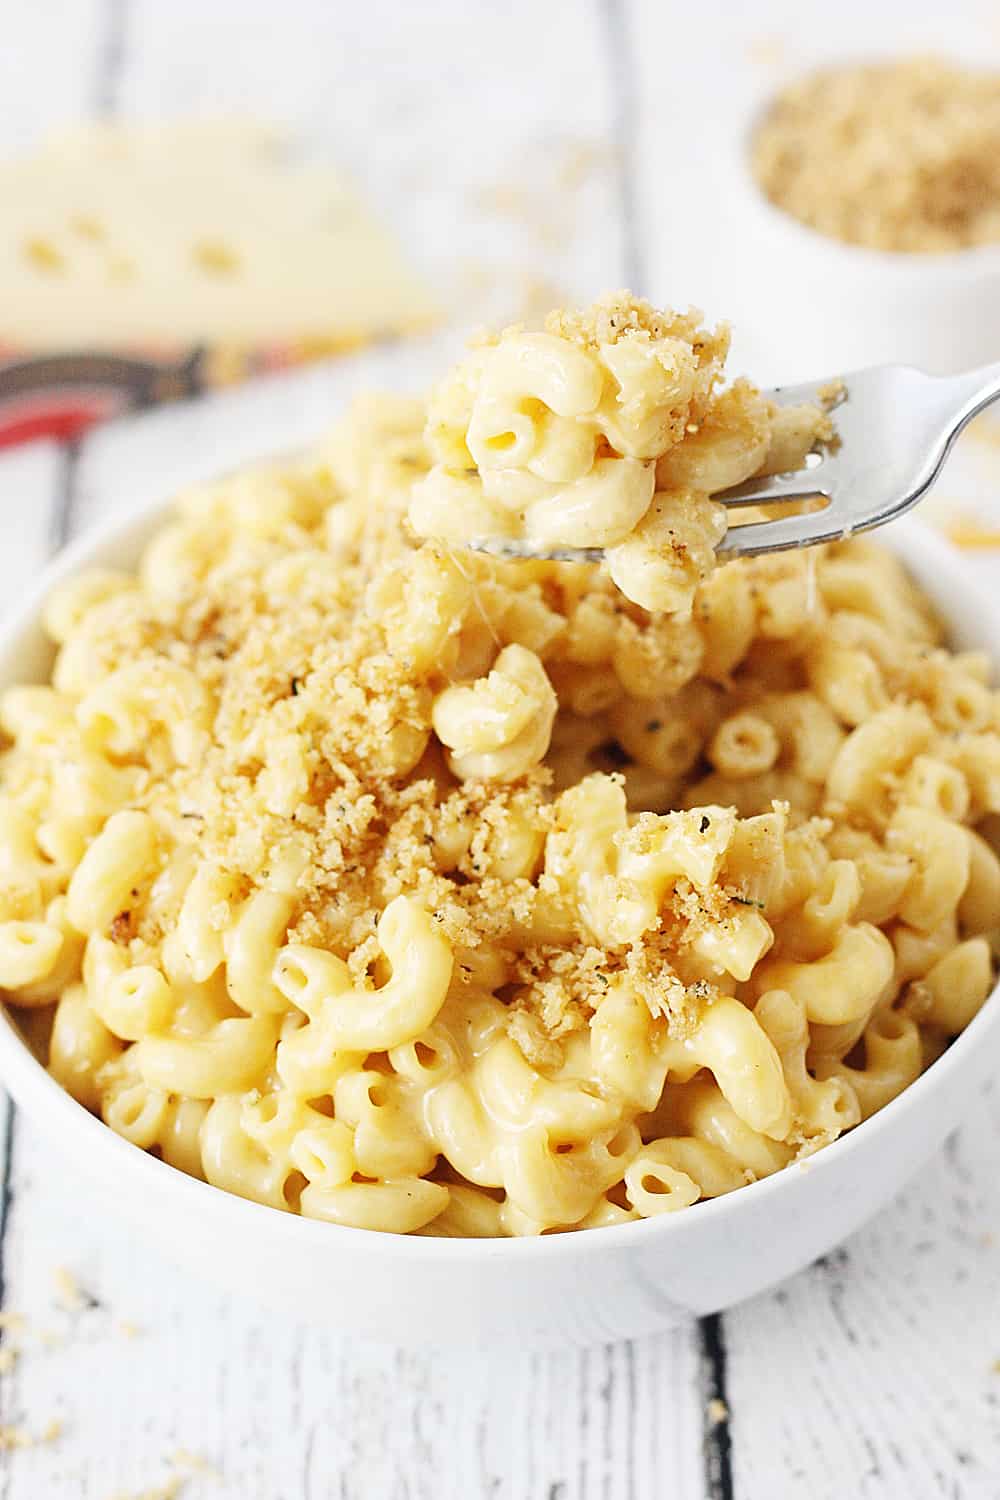 Easy Instant Pot Mac and Cheese - This easy Instant Pot mac and cheese is the creamiest, cheesiest, downright most delicious Instant Pot mac and cheese recipe ever! #macandcheese #instantpot #pressurecooker #macaroniandcheese #pasta #easyrecipe #recipe #cooking #halfscratched #ad #jarlsberg #cheese